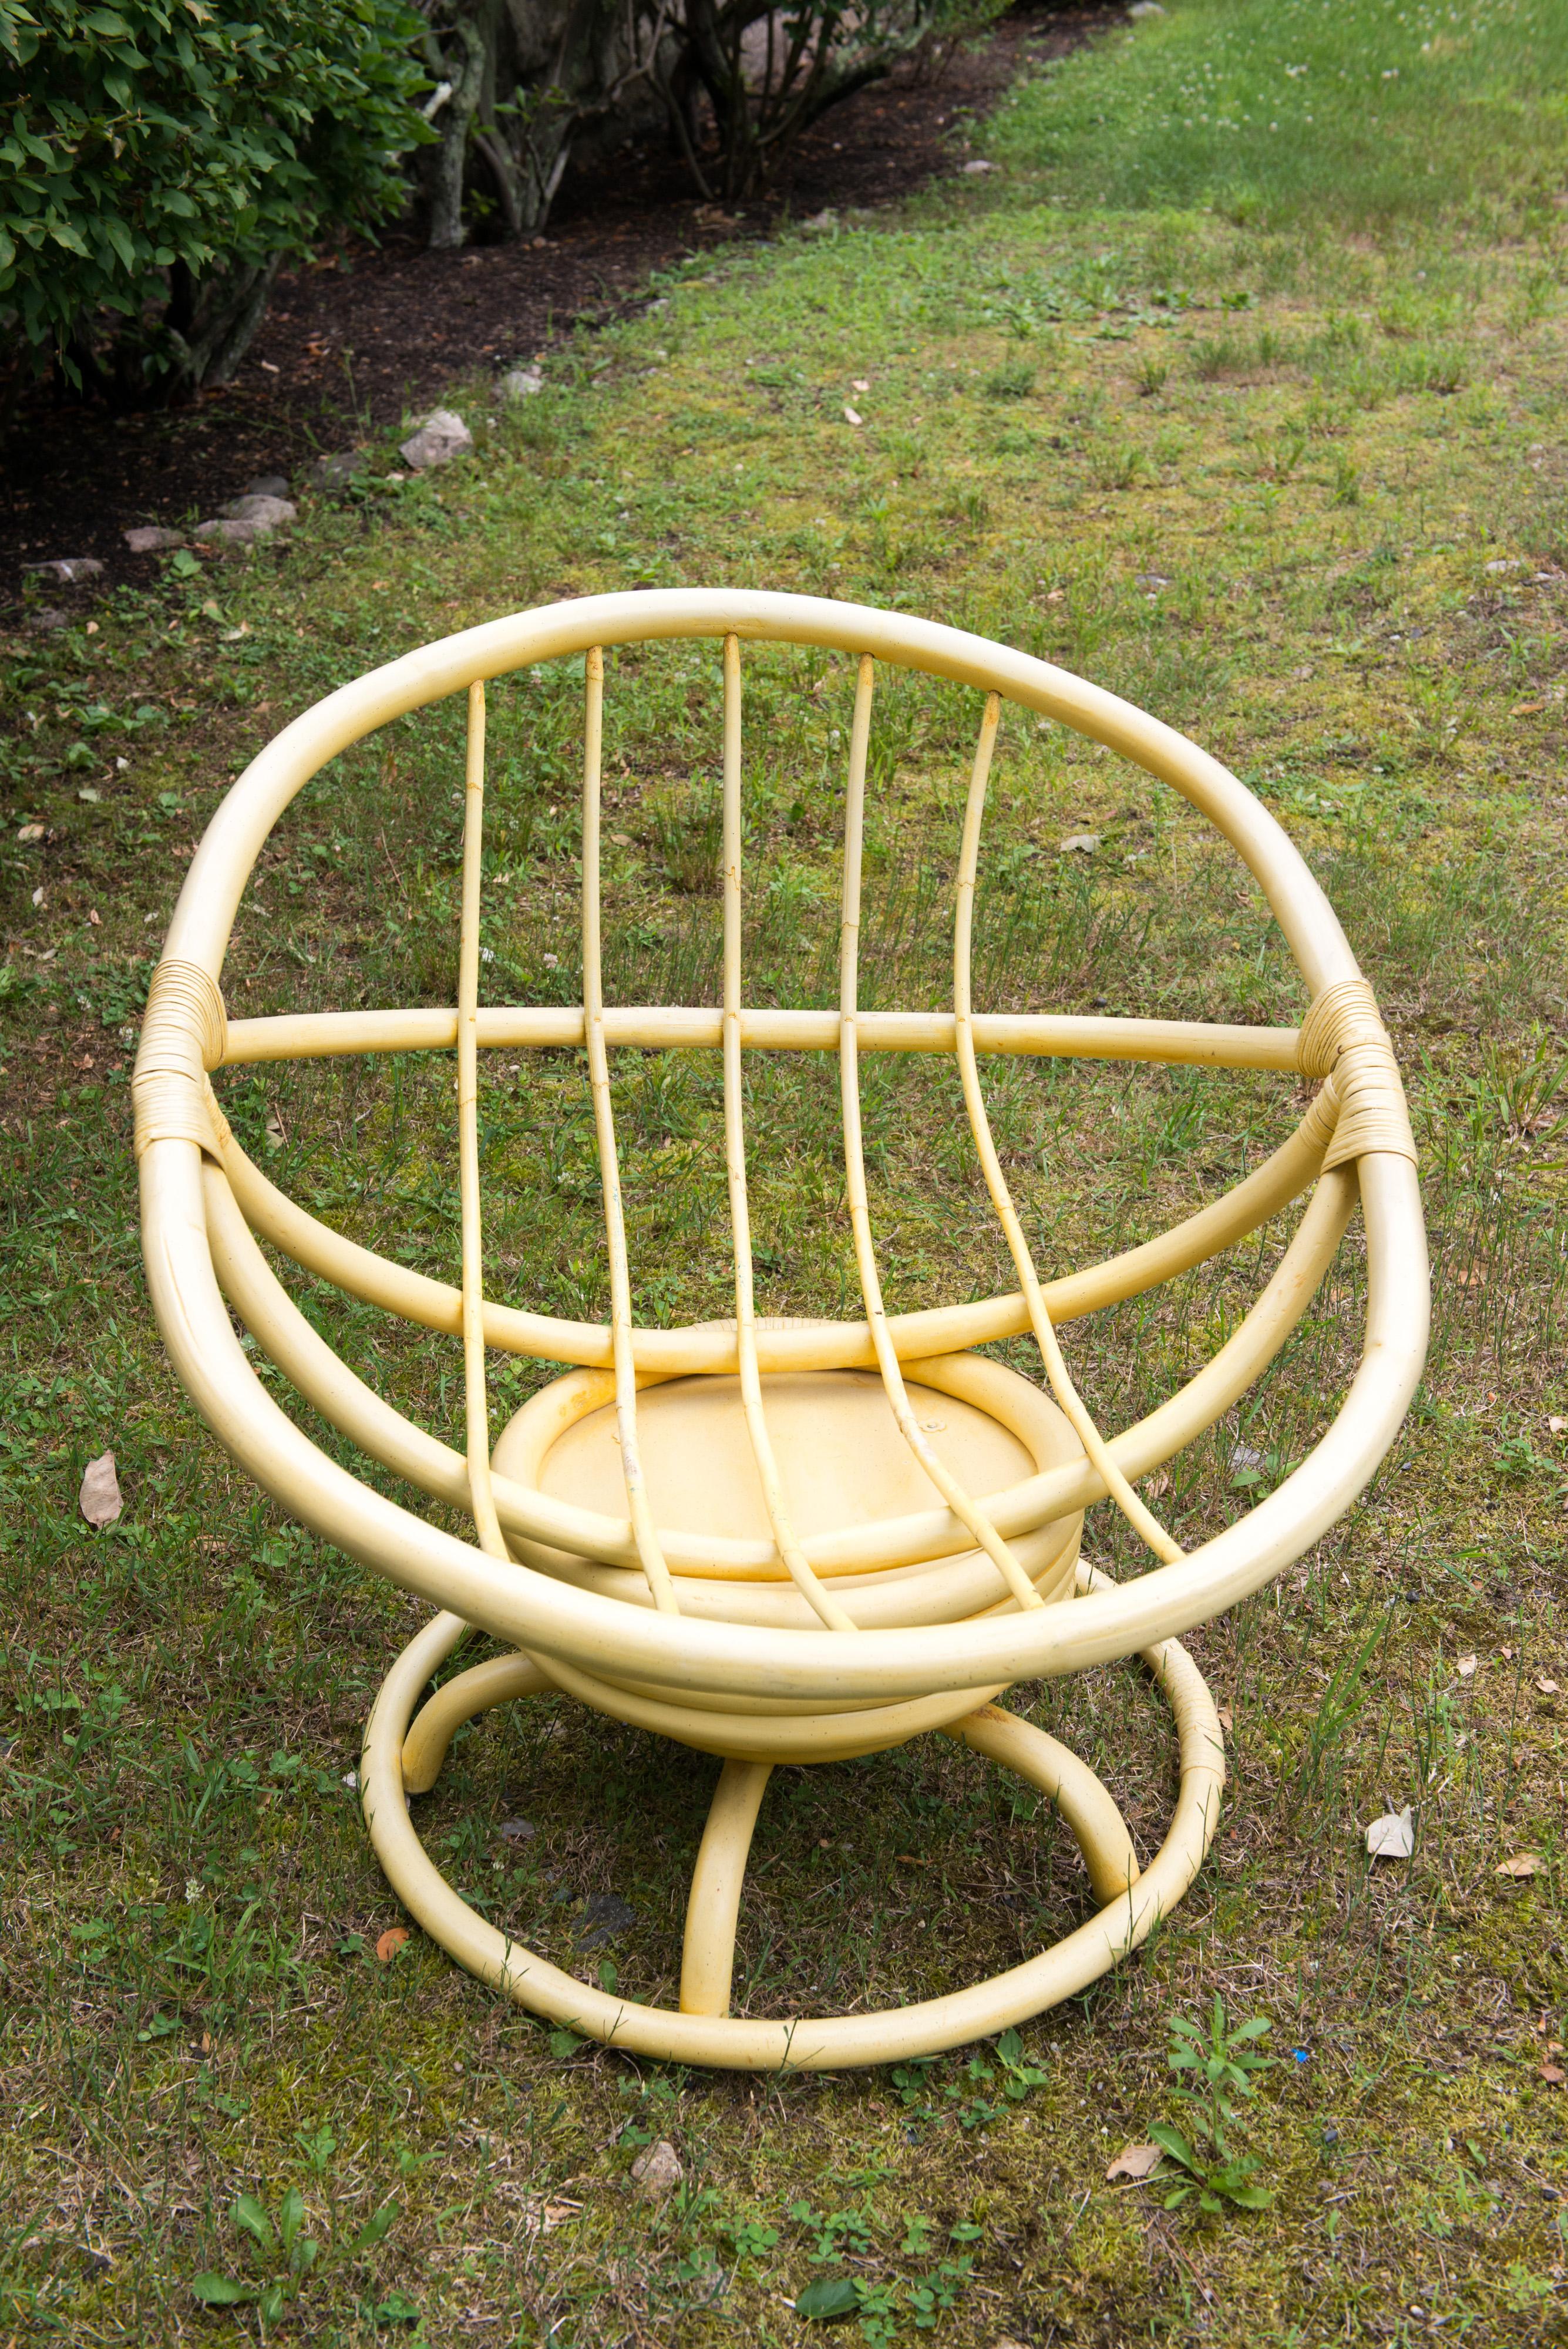 1970s vintage Ficks Reed yellow rattan or faux bamboo rocking chair with original yellow finish and fabric.
Remarkably good condition. Cushion has stiffened with age.